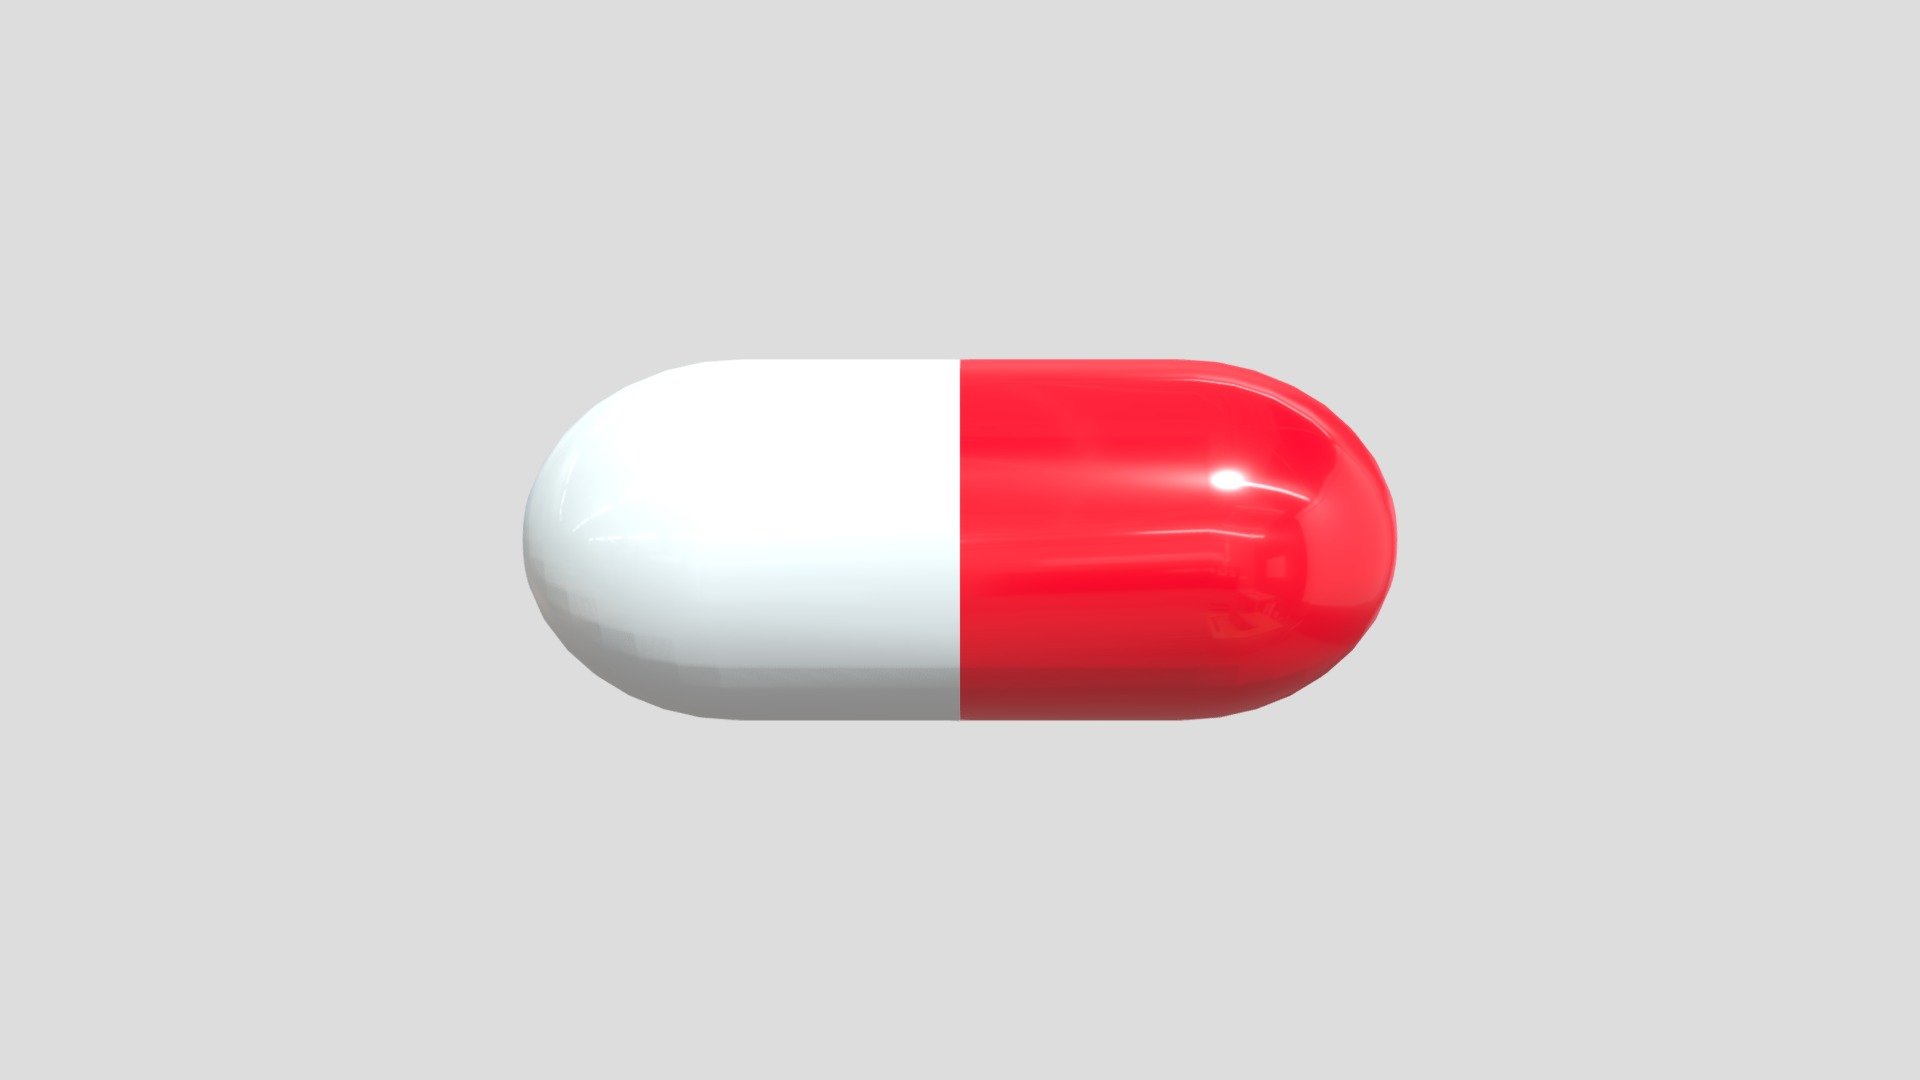 Order fast Klonopin 1mg Online For Anxiety In WV - 3D model by Xanax1mgBuy [9e2c526] - Sketchfab